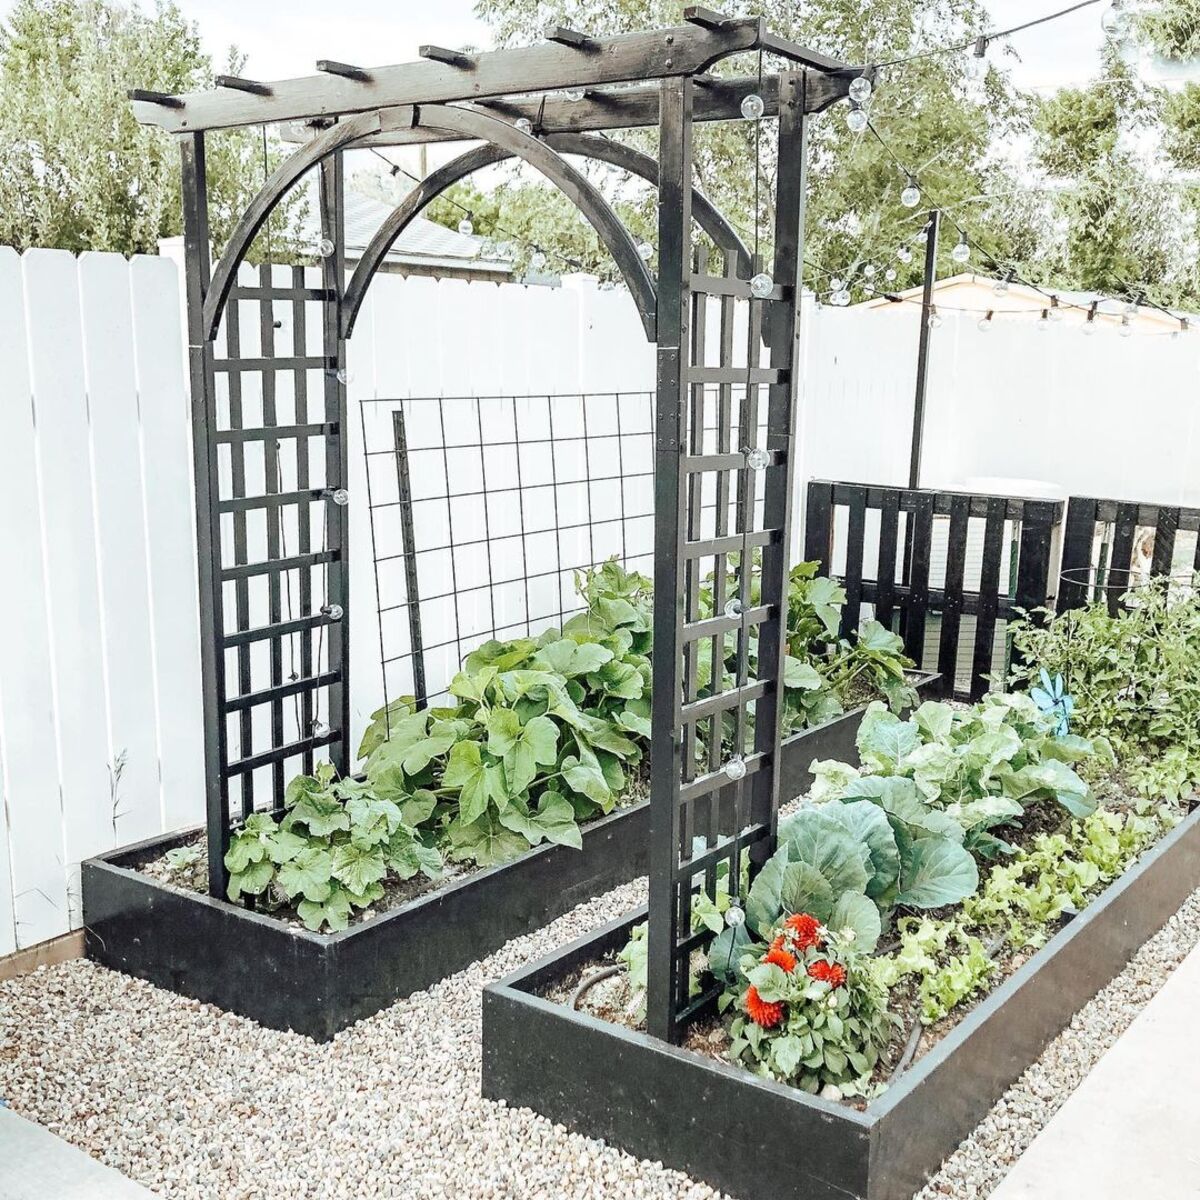 Raised Garden Beds With An Arch Made From Wood